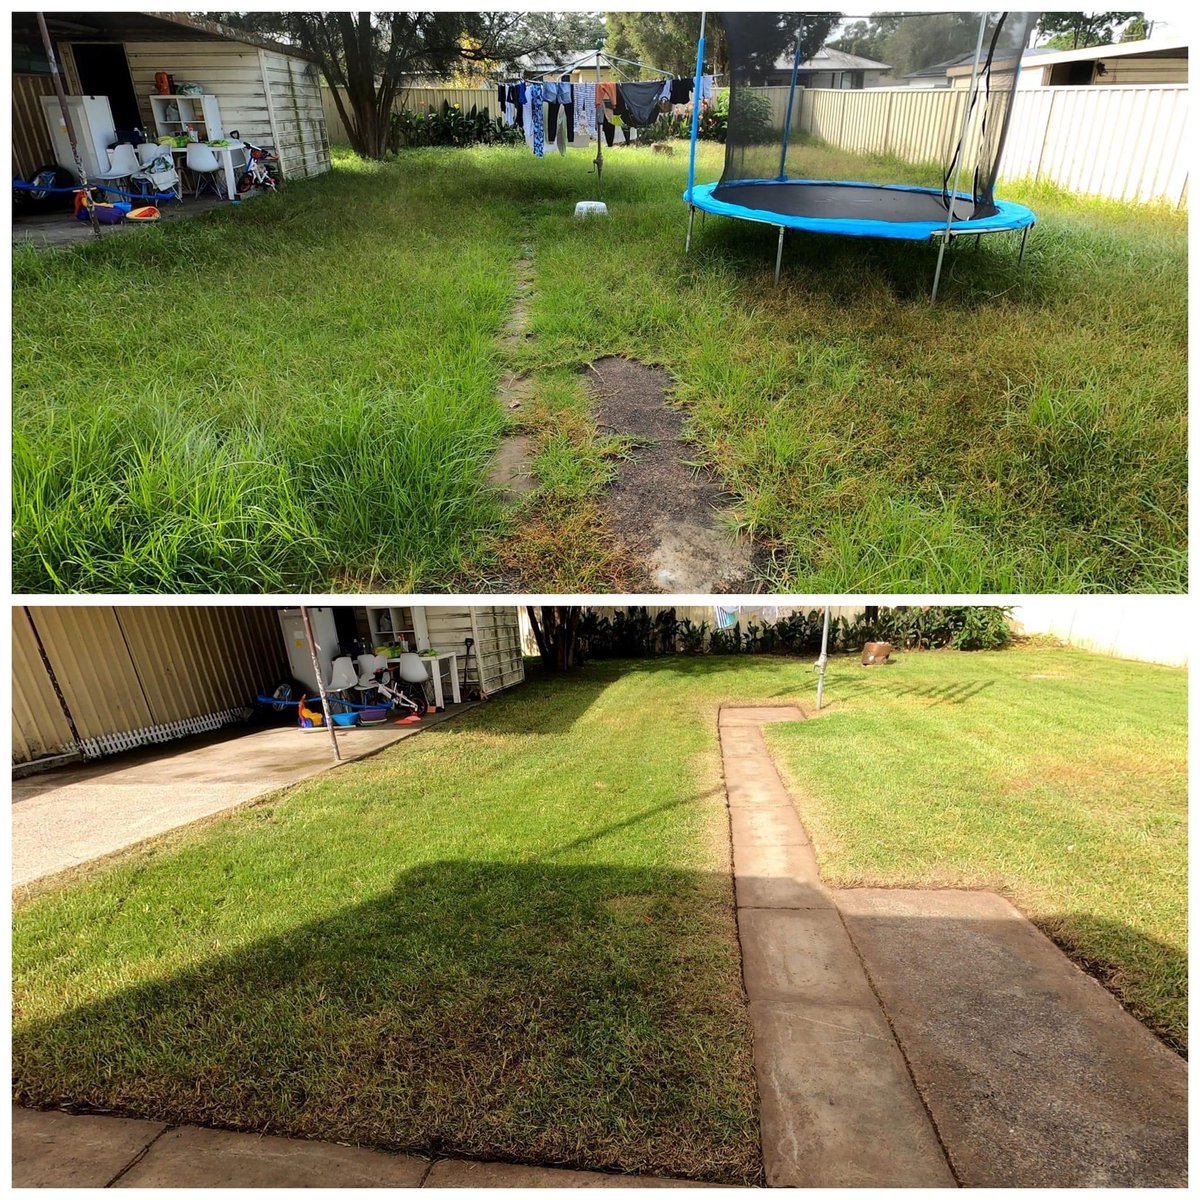 #LawnGoals! From mowing to edging, we do it all! #BladeSongrass #LawnCare #LawnLove #GardenGoals #OutdoorLiving #HomeExterior #LawnTransformation #GardenInspiration #YardEnvy #LawnLife #GreenThumb #Landscaping #BeautifulOutdoors #CurbAppeal #LawnsOfInstagram #GardeningCommunity